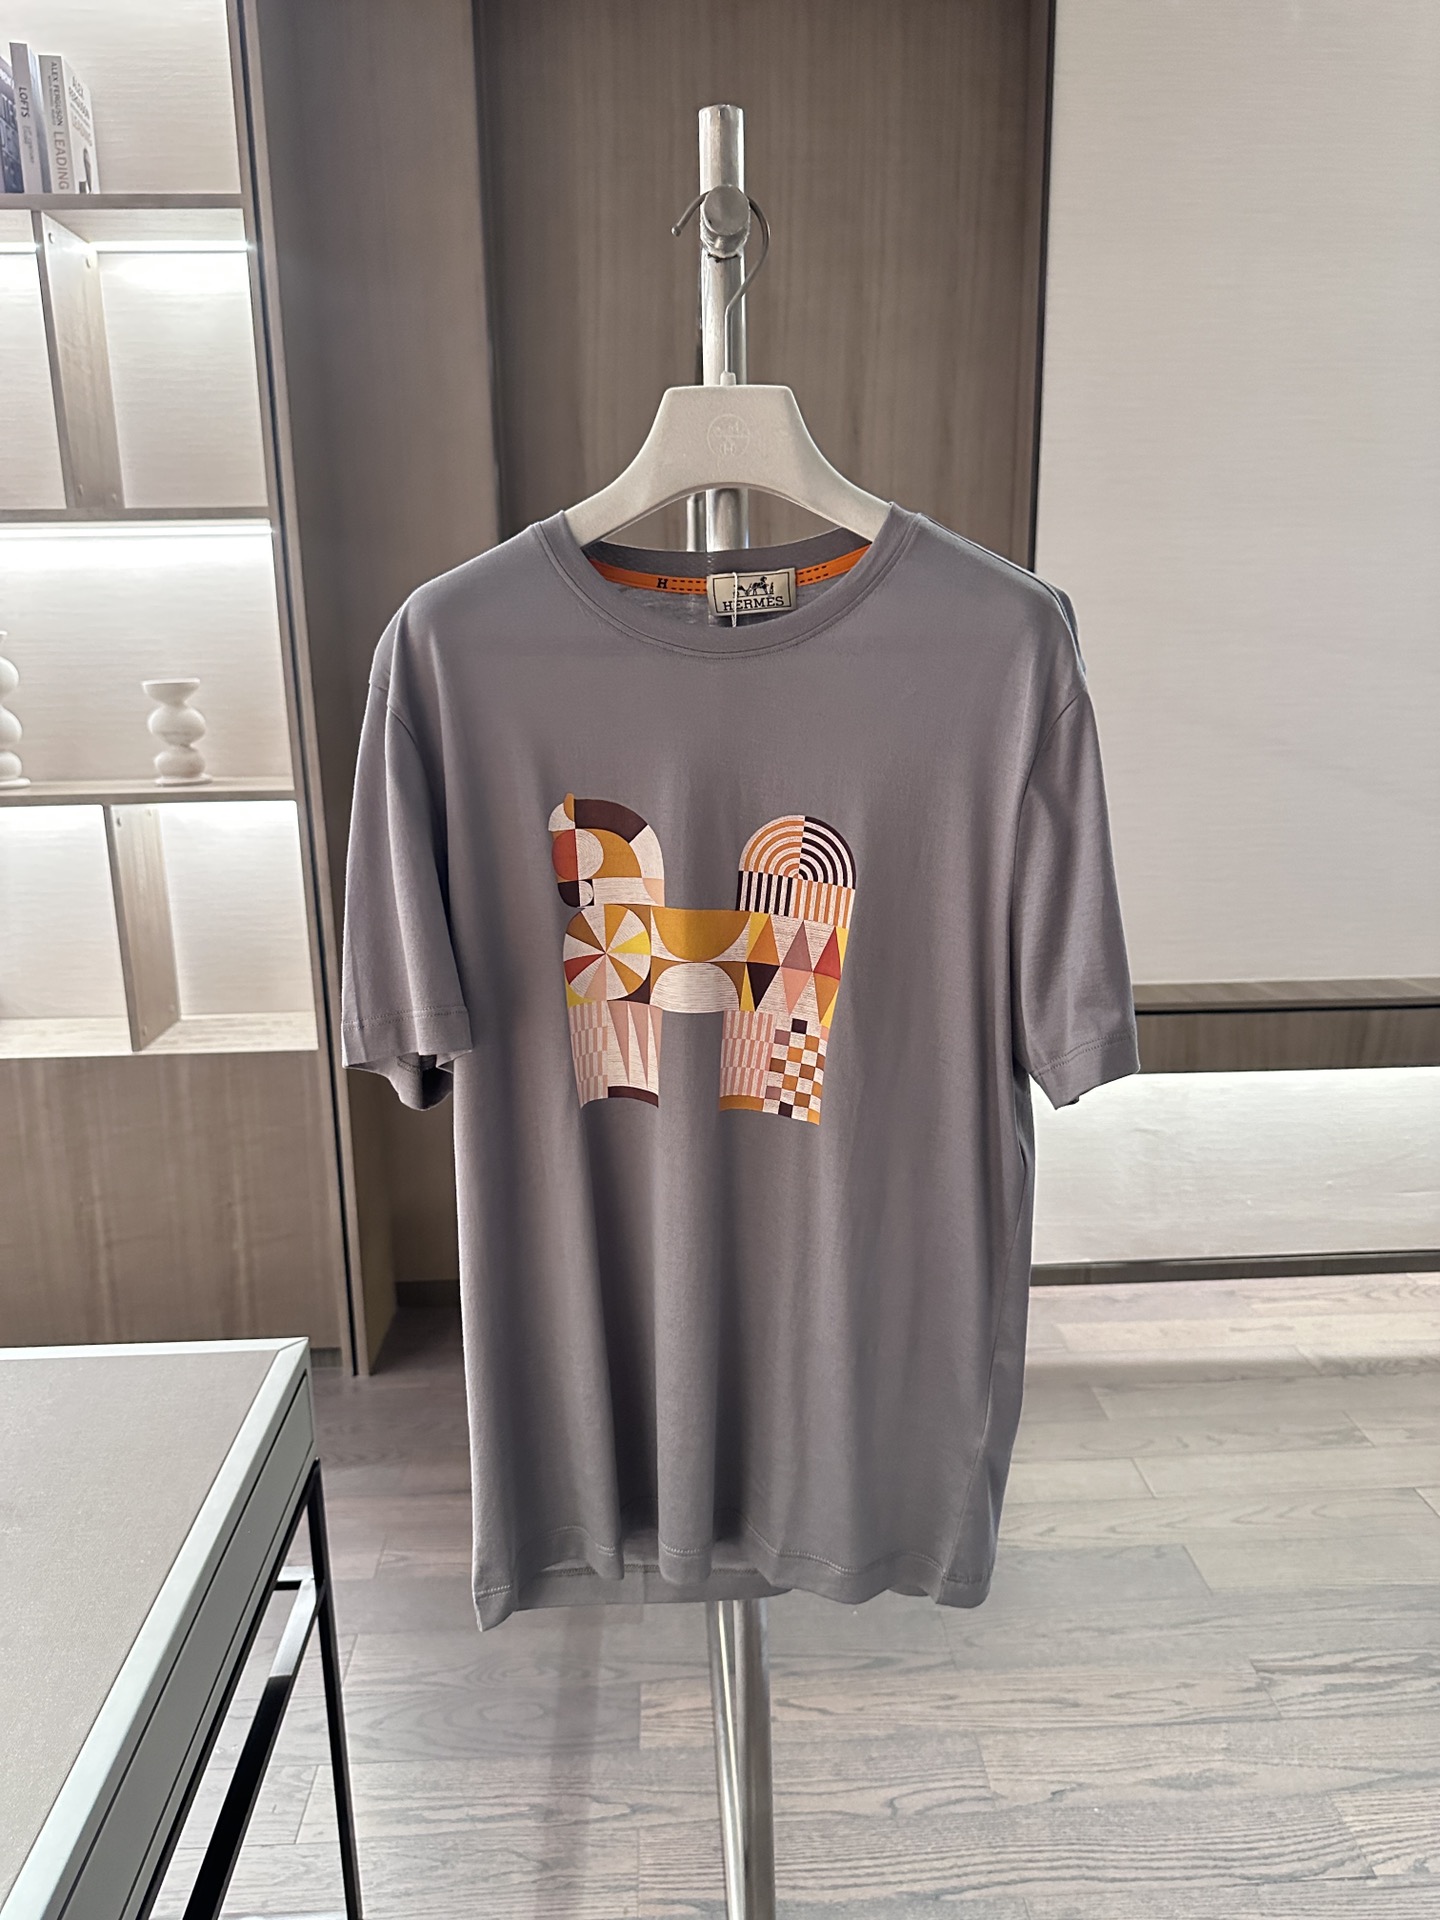 Hermes Clothing T-Shirt Embroidery Cotton Spring Collection Short Sleeve